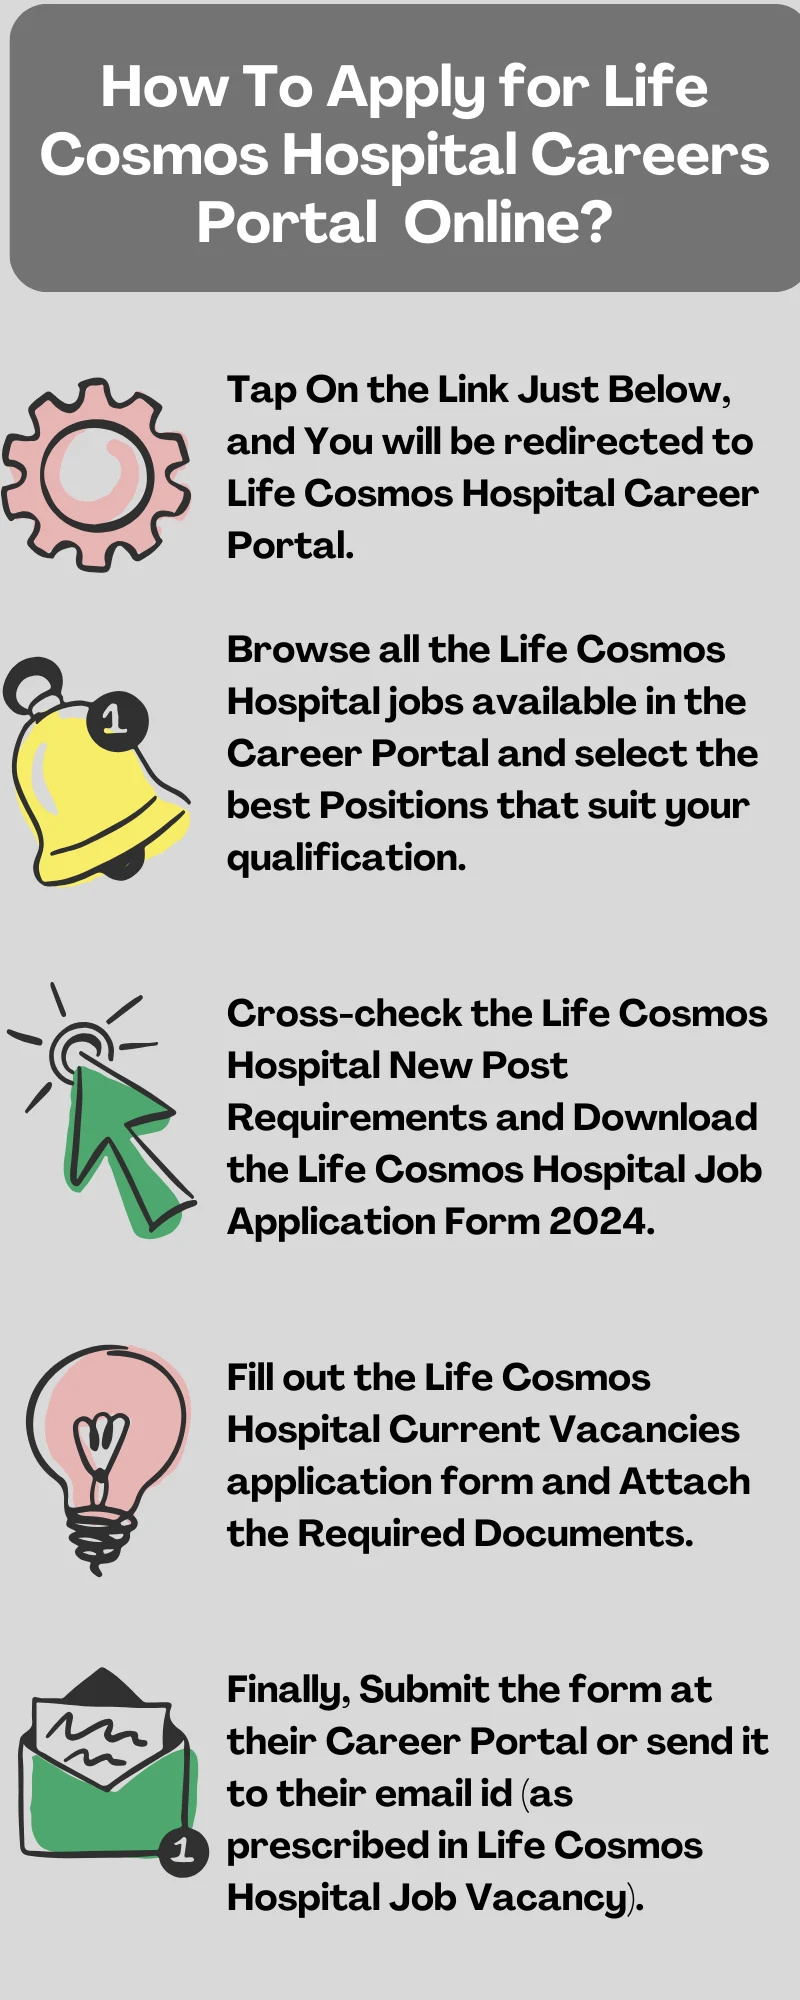 How To Apply for Life Cosmos Hospital Careers Portal Online?